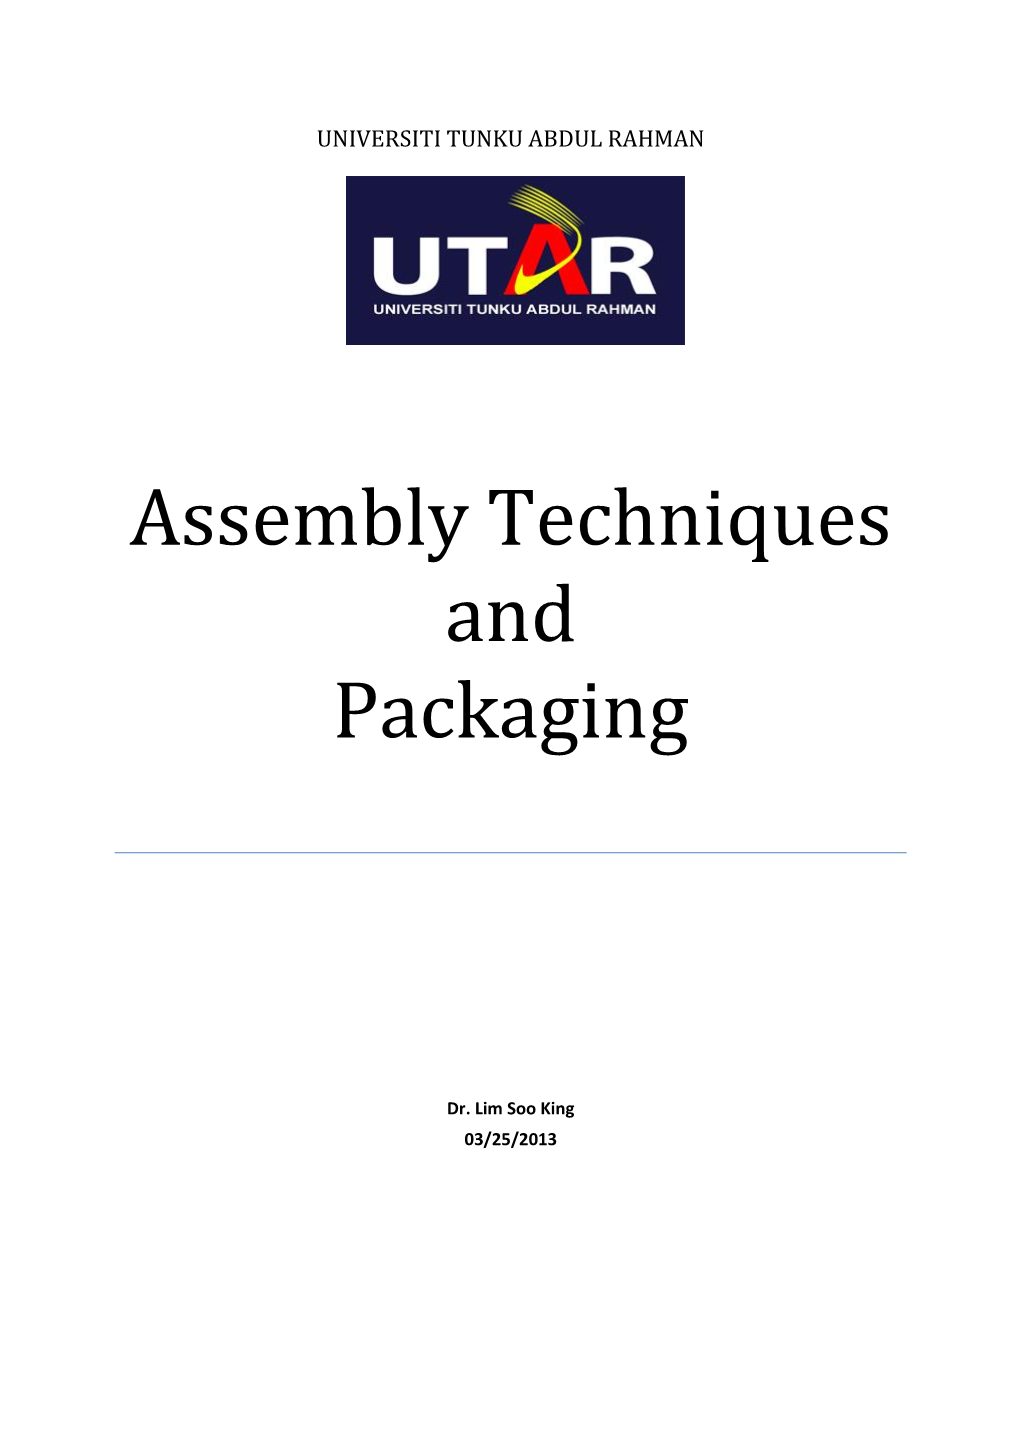 Chapter 3 Assembly Techniques and Packaging